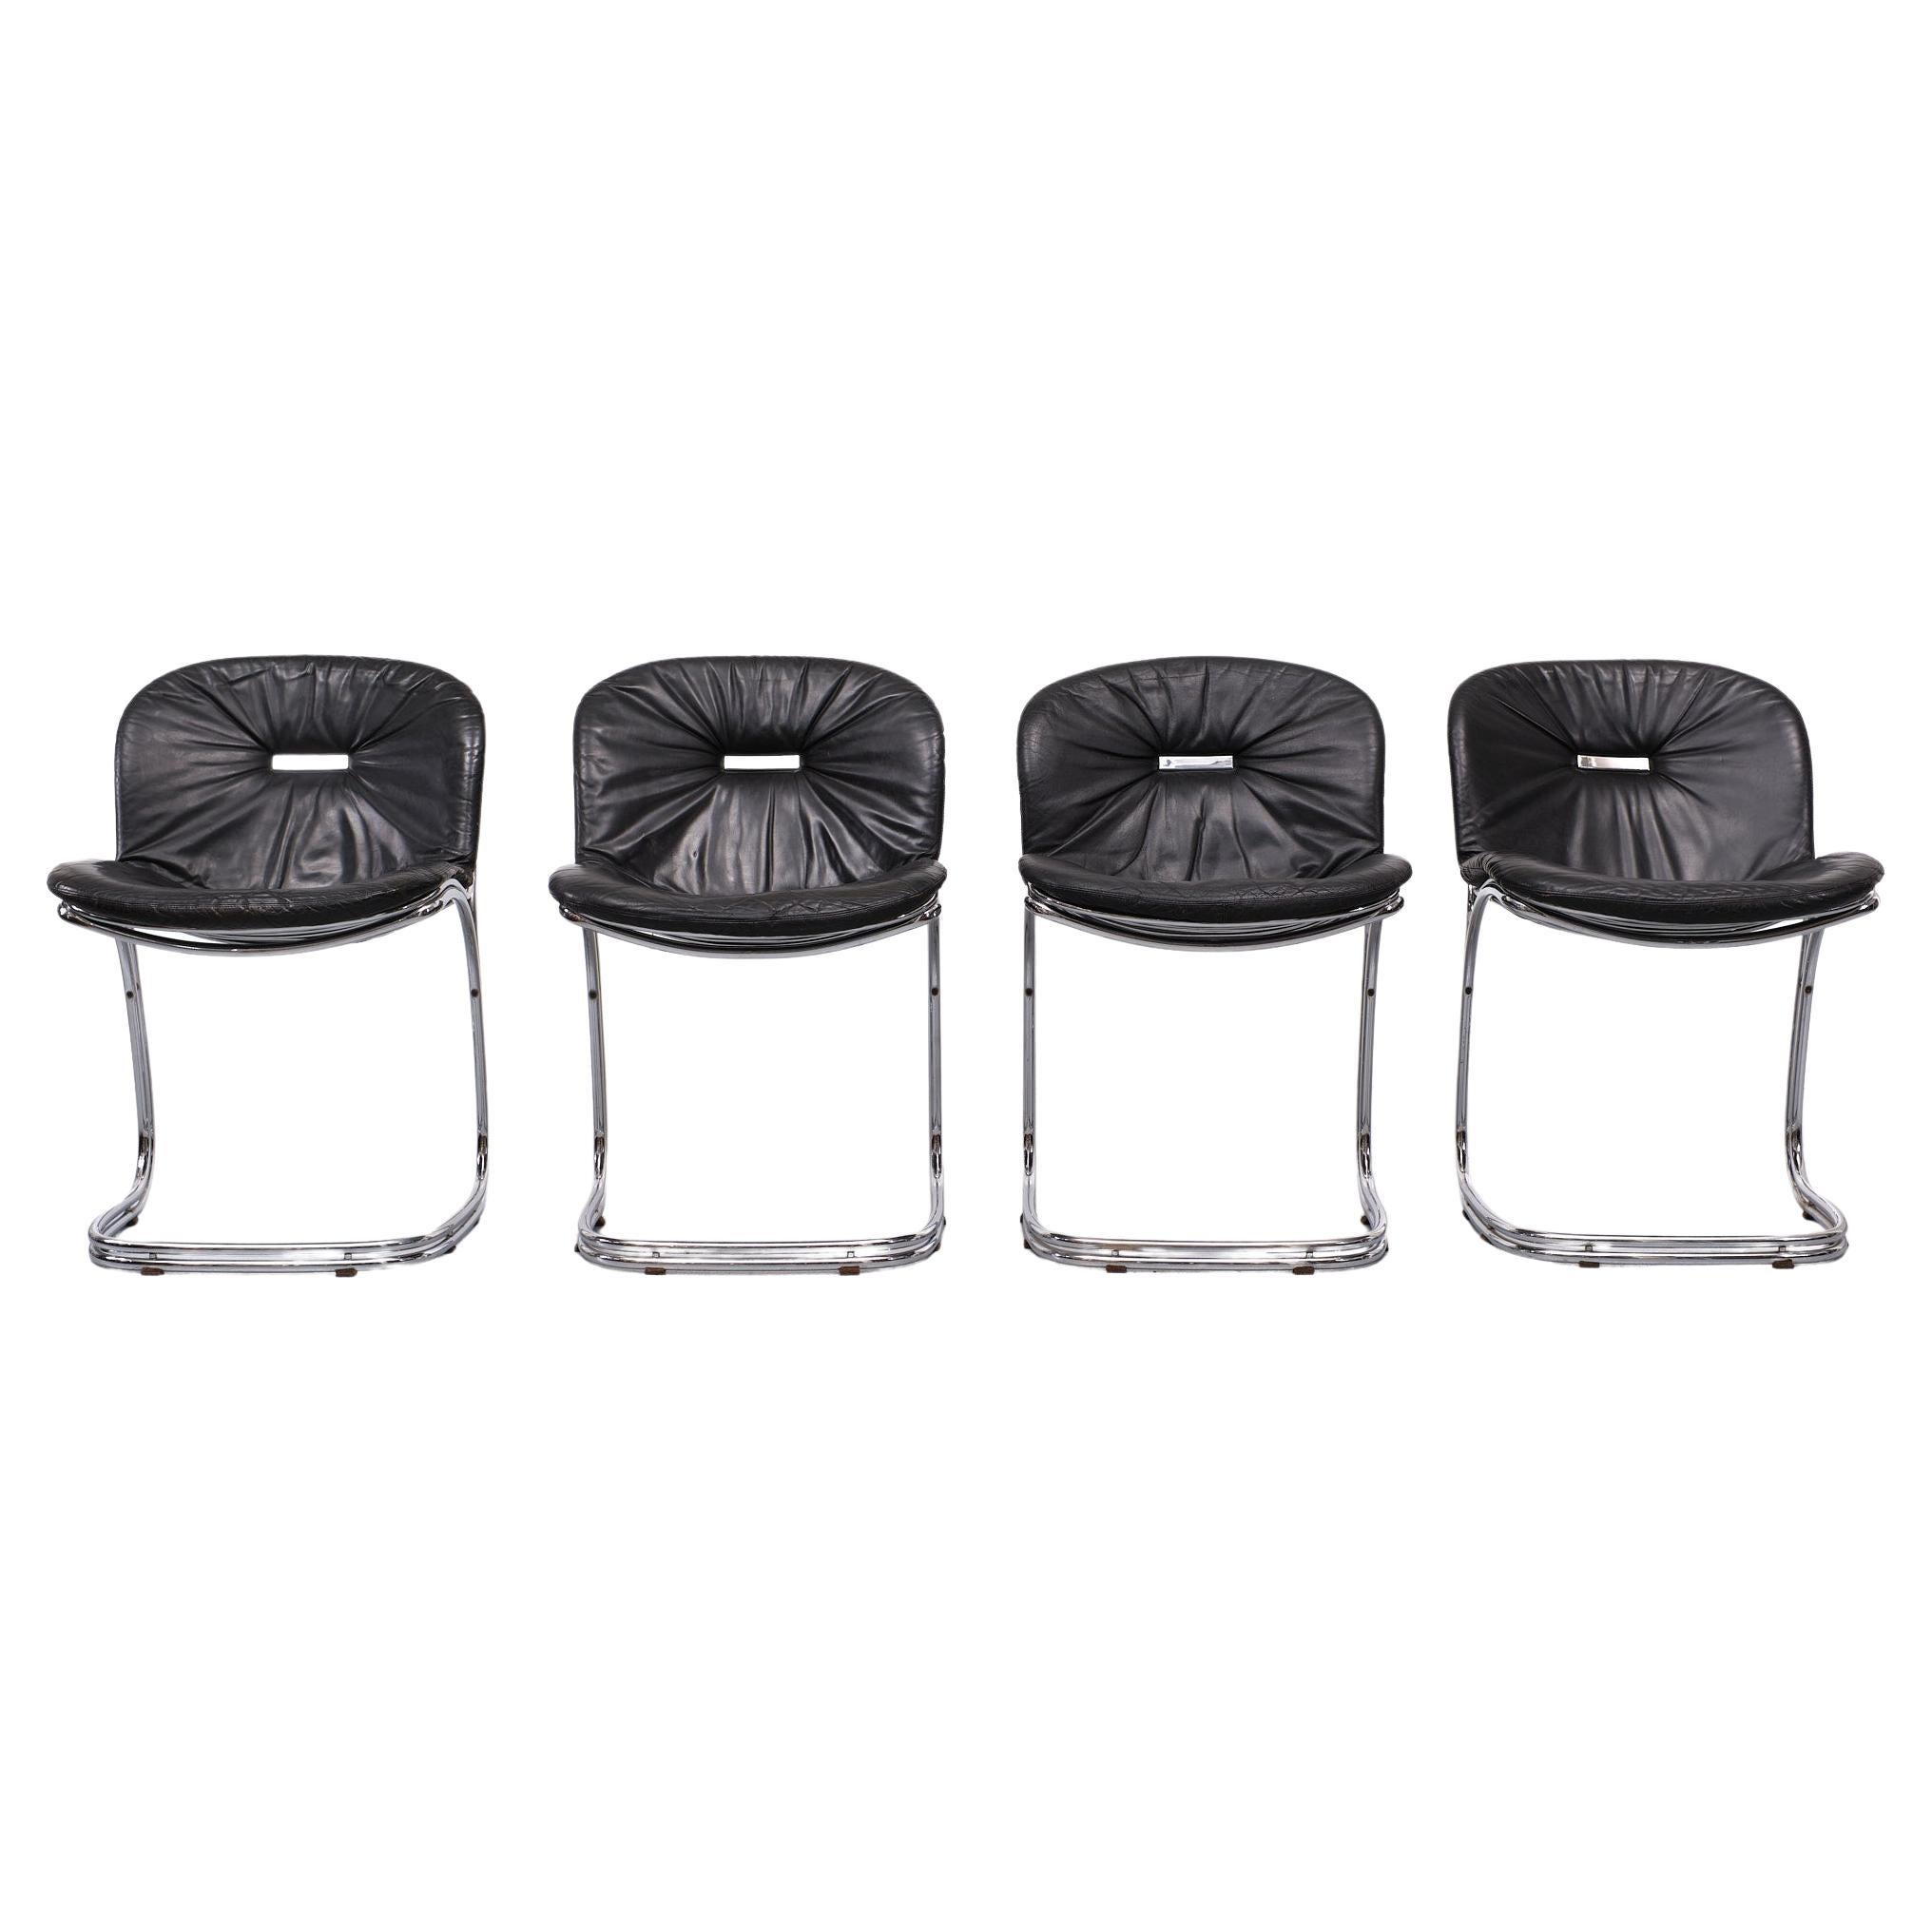 The Sabrina chair was designed by Gastone Rinaldi for RIMA, Padova, Italy in 1970. The Sabrina chair is published in the famous Italian standard reference for Interior Design and Furniture This set of four Sabrina Black leather chairs is from the